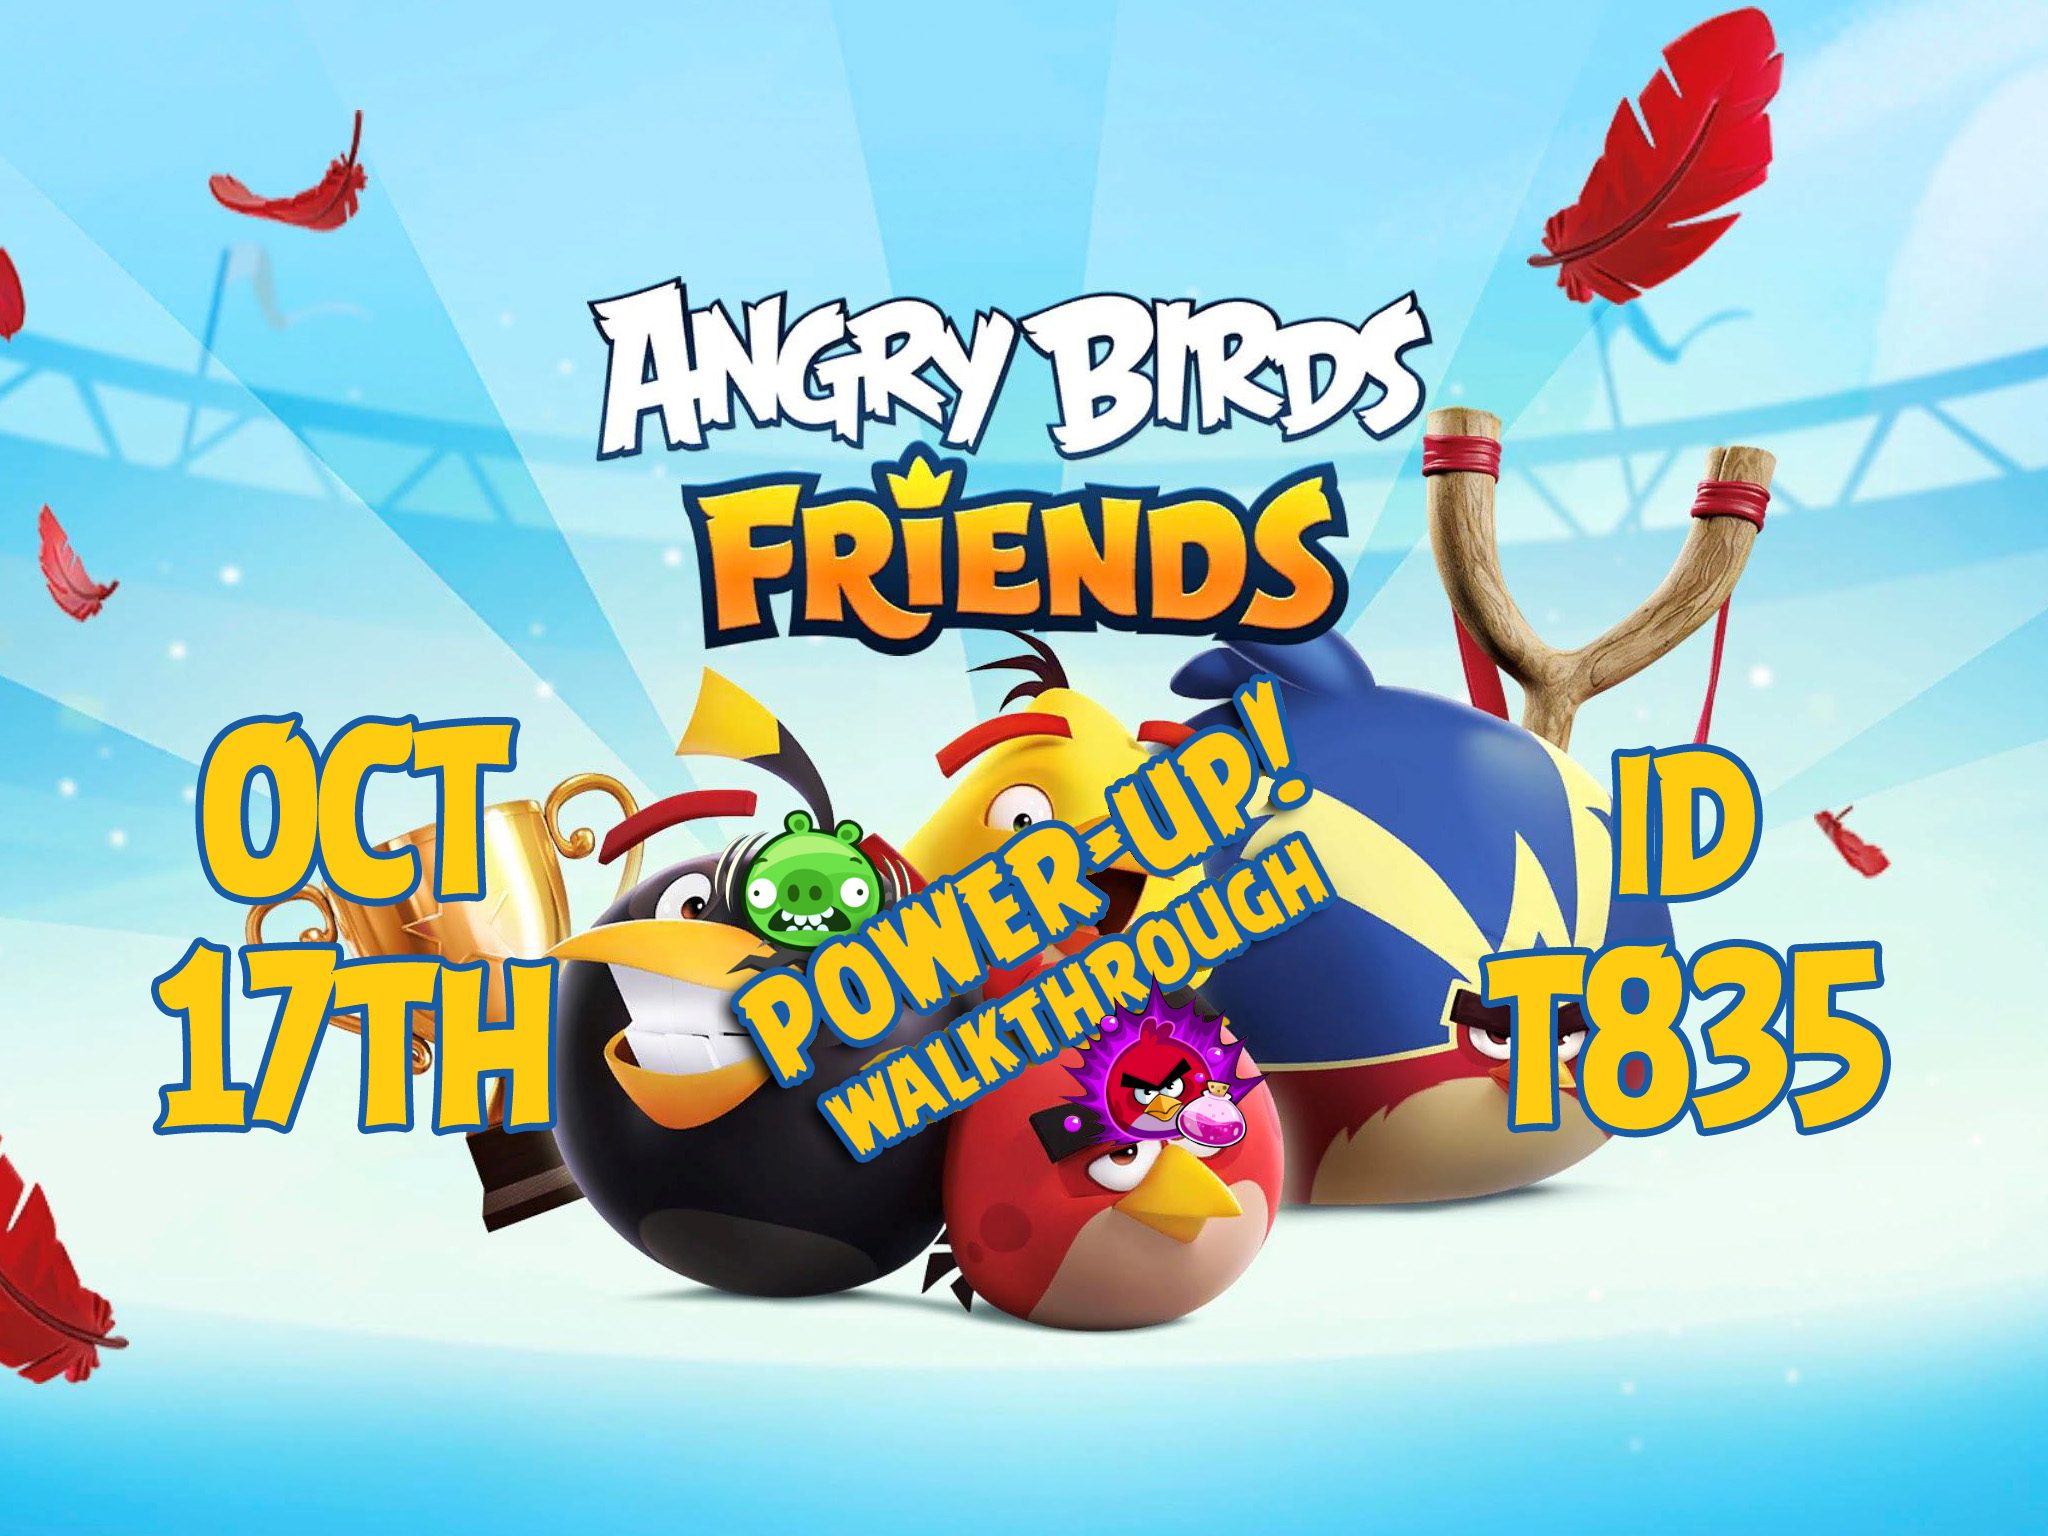 Angry-Birds-Friends-Tournament-T835-Feature-Image-PU